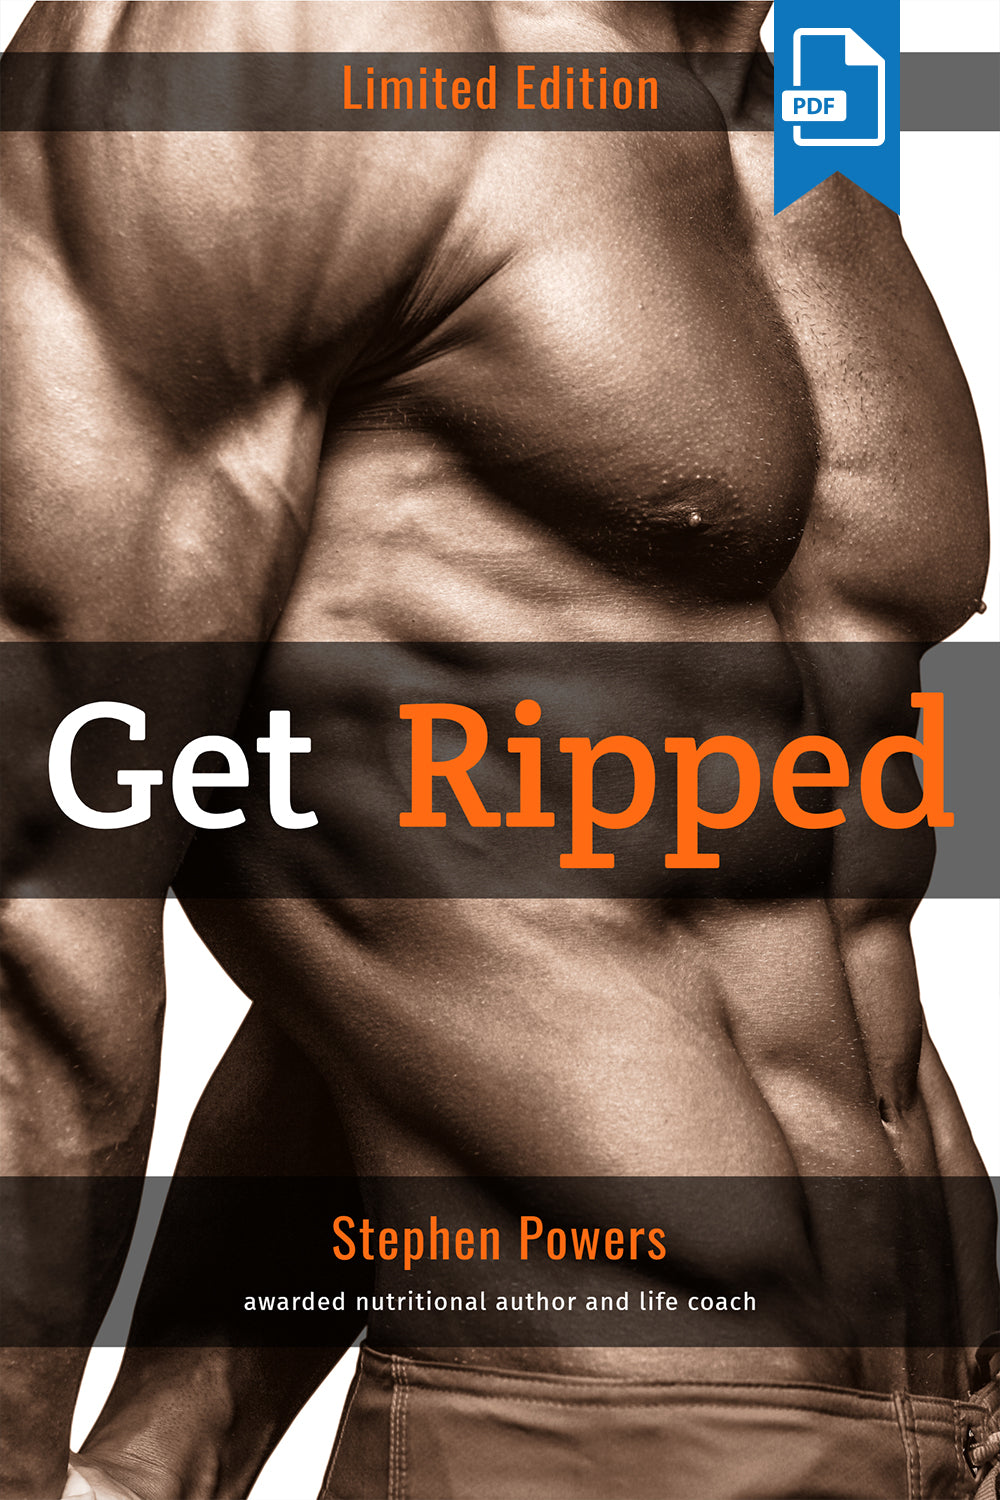 Get Ripped | Nutrition, Meal Plan, and Training